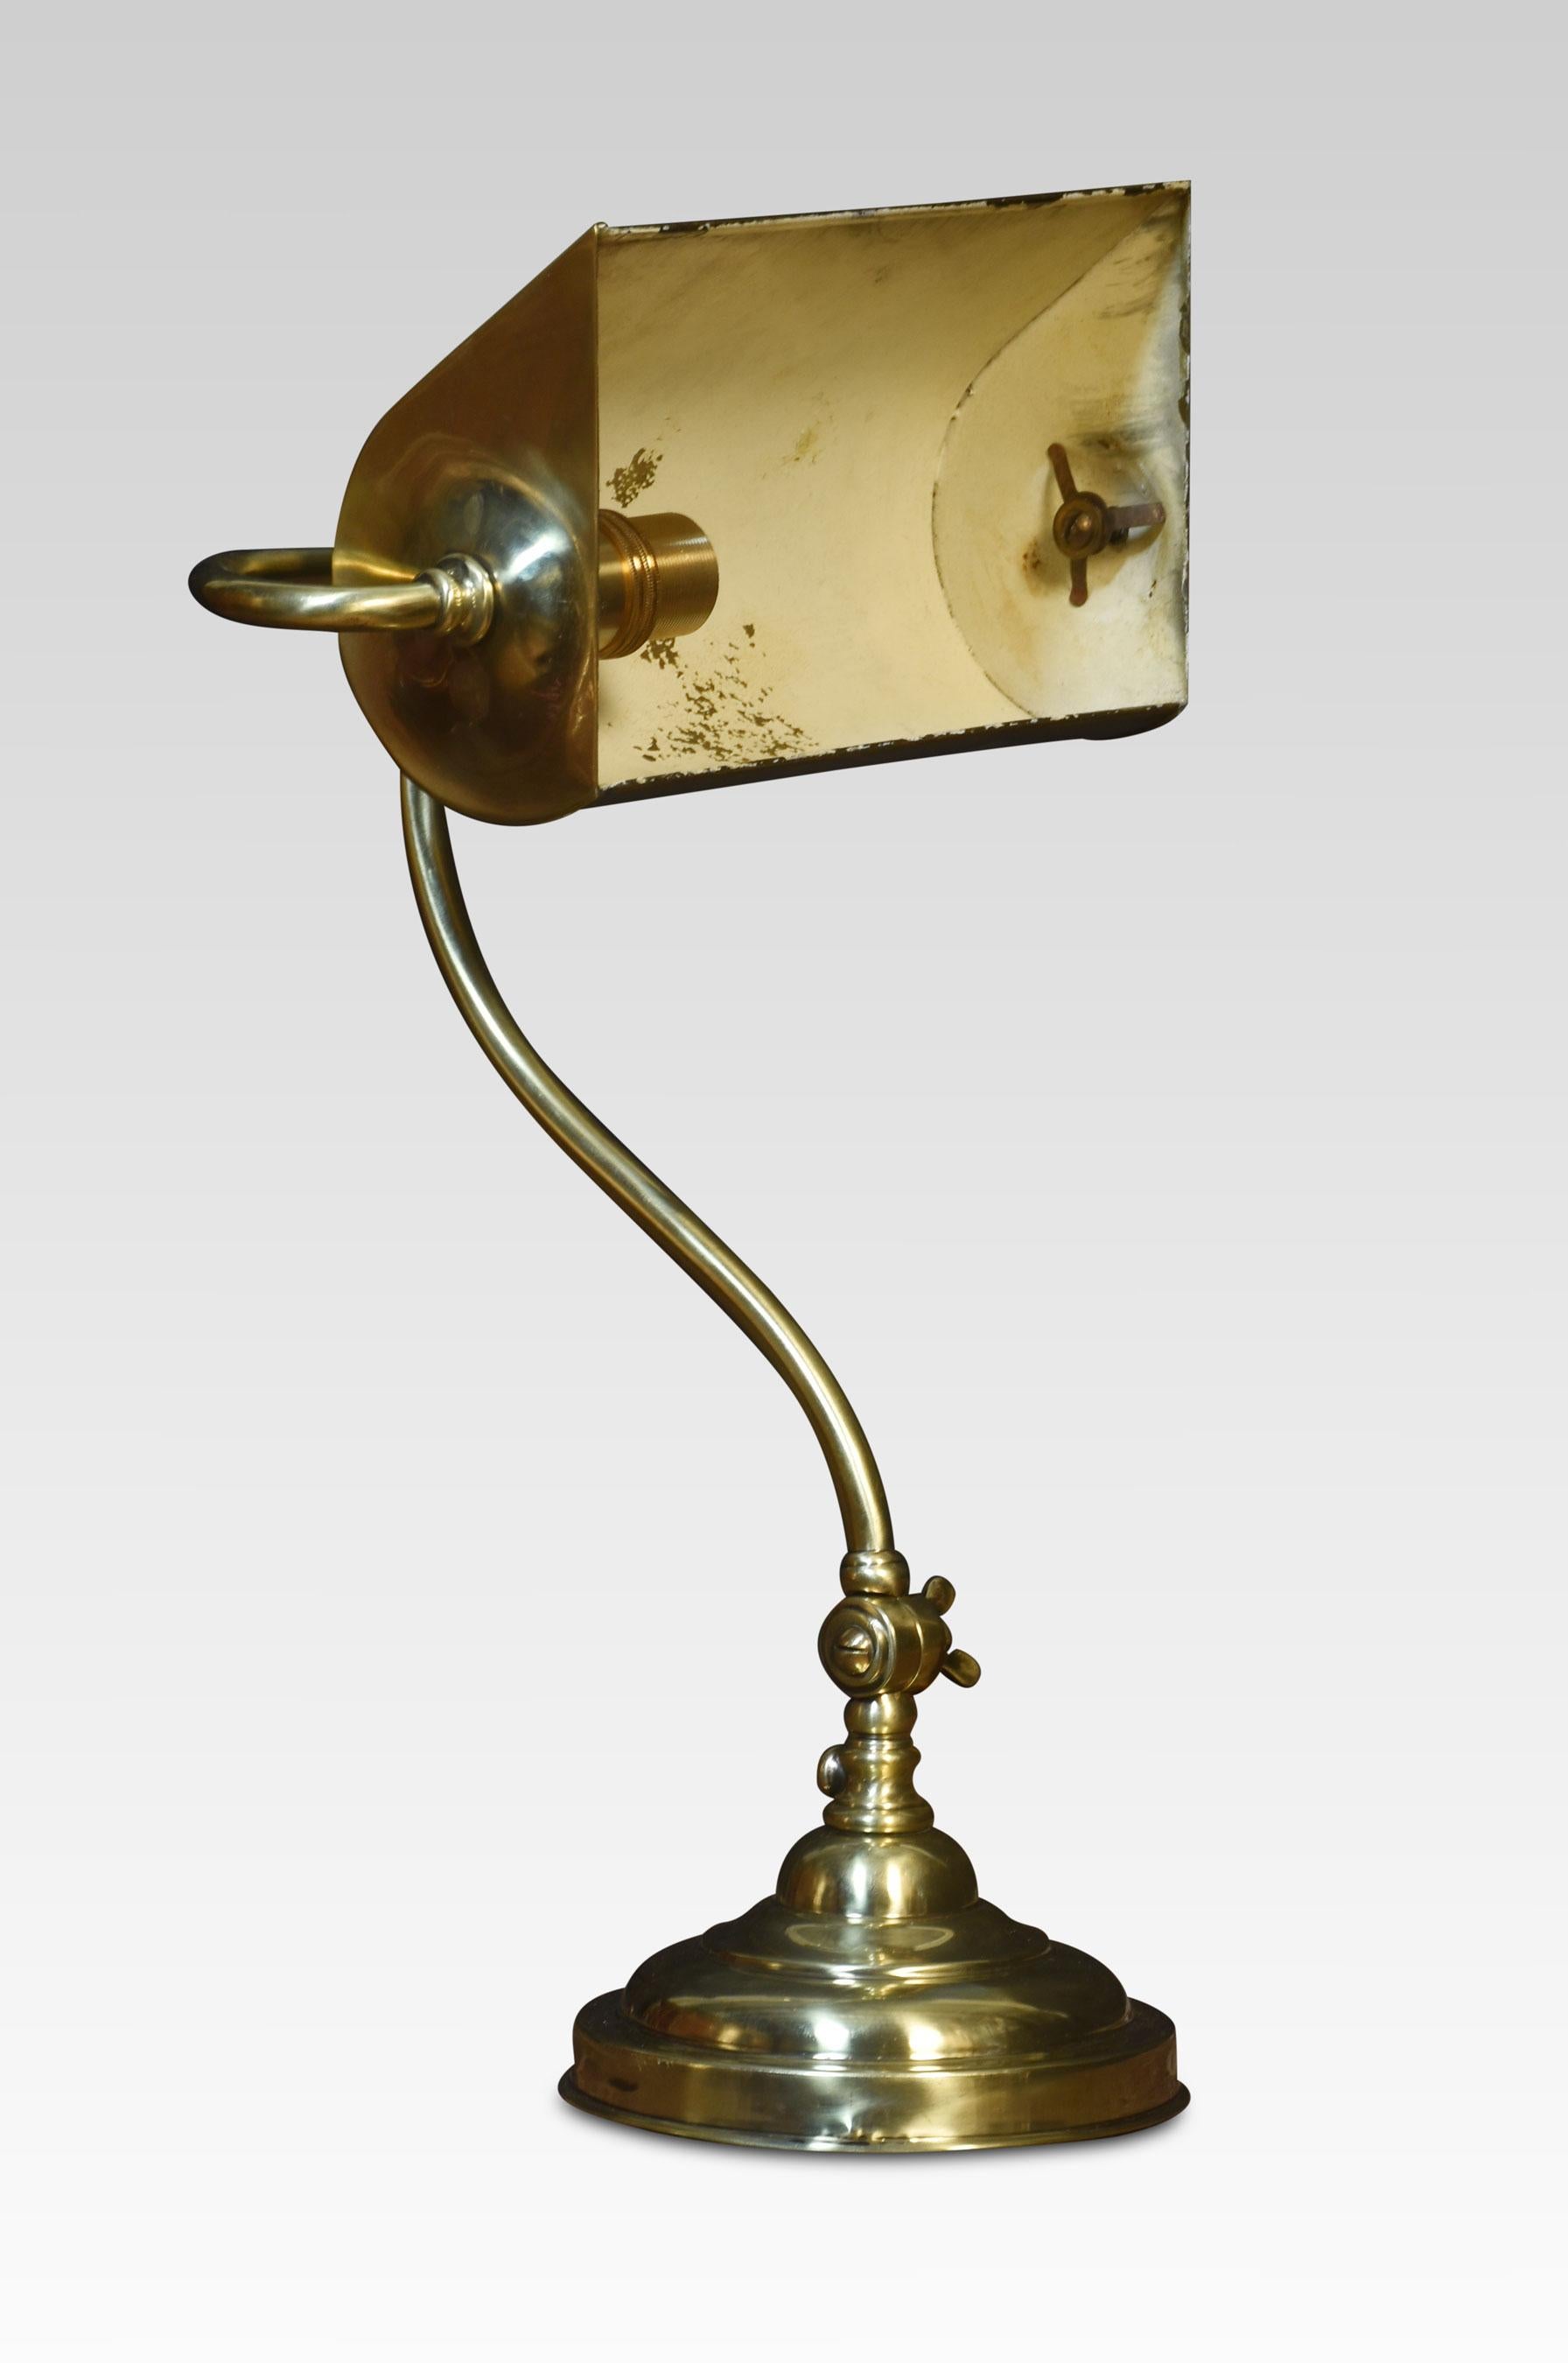 Bankers brass desk lamp, the shaped brass base, and pivoted sweeping arm supporting adjustable lampshade. The lamp has been rewired.
Dimensions
Height 15.5 inches
Width 12 inches
Depth 8 inches.